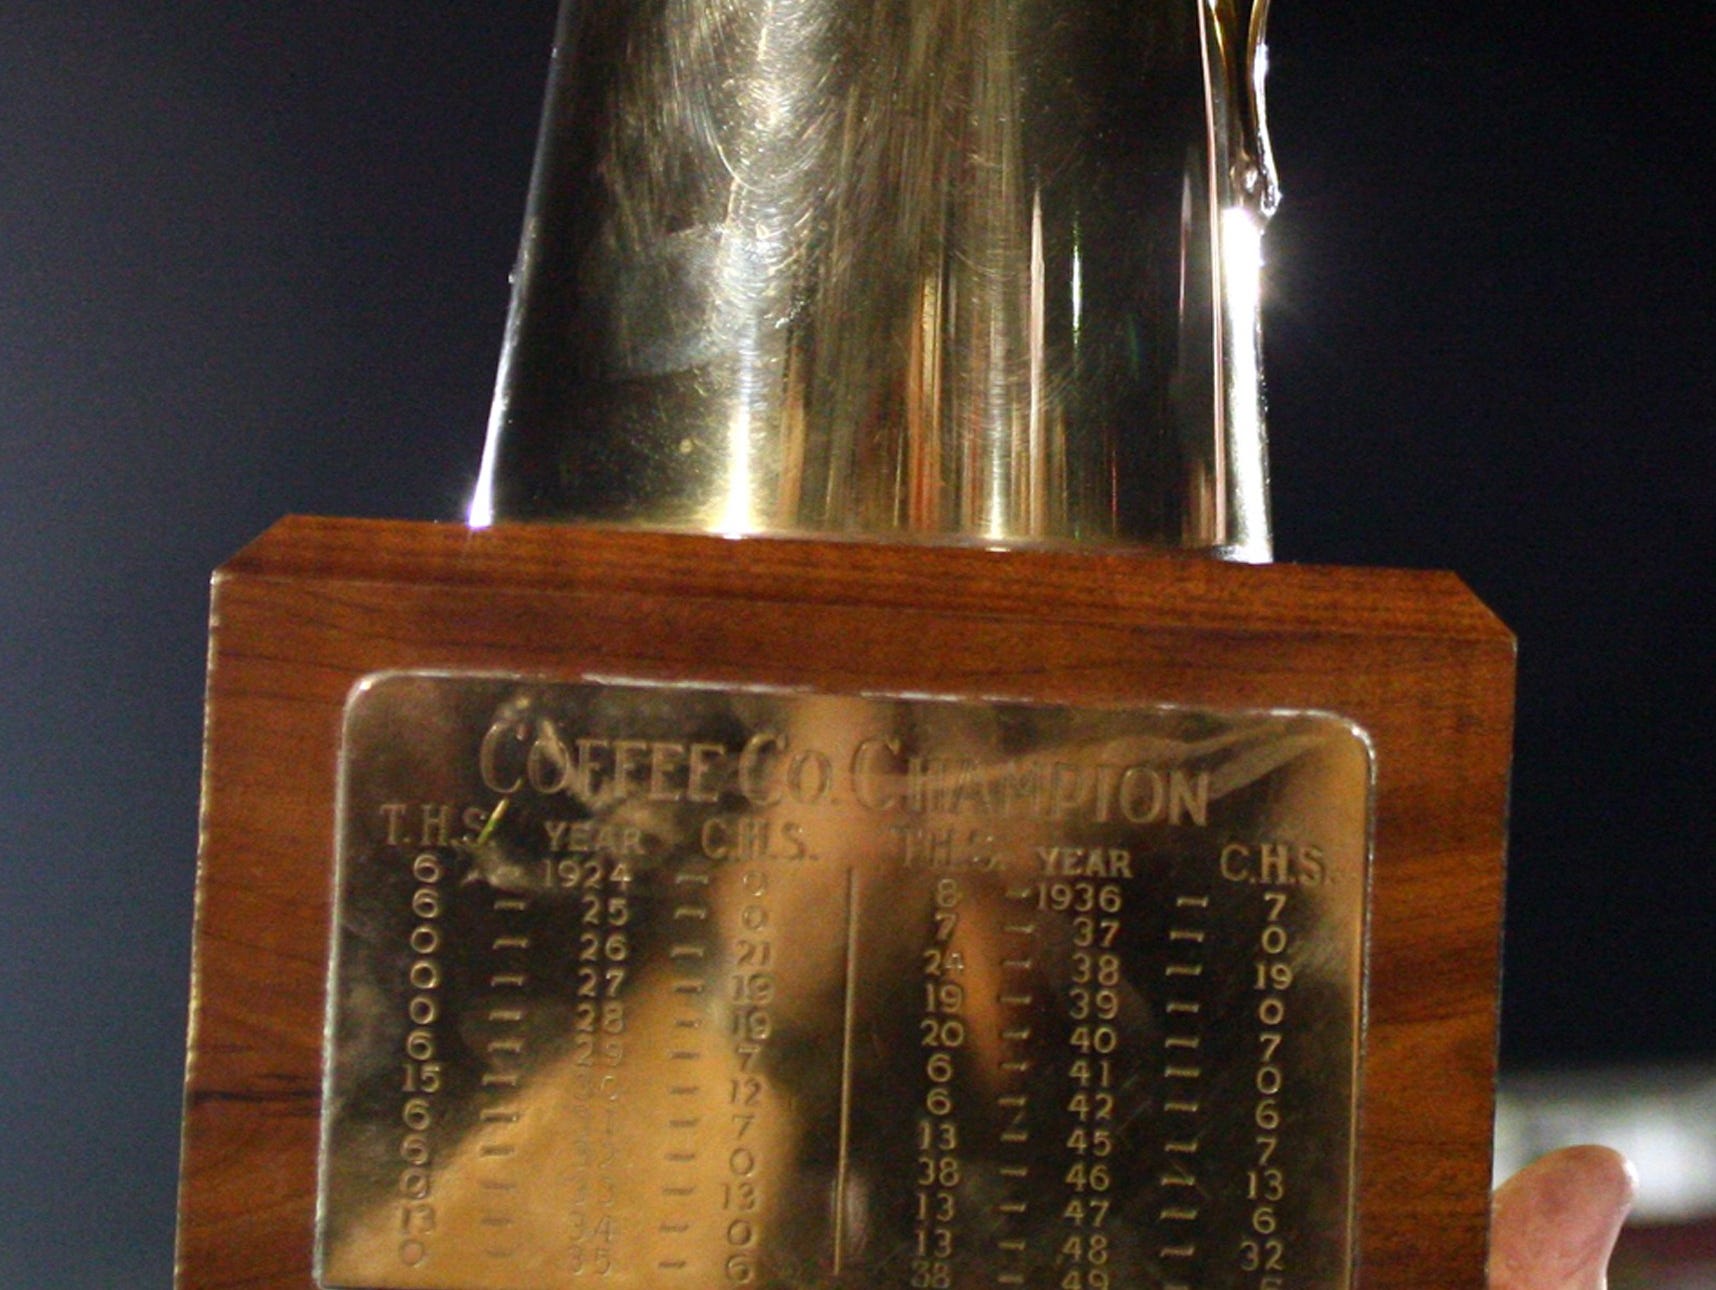 The Coffee Pot Trophy has been awarded for the winner of the Coffee County-Tullahoma game since 1924.